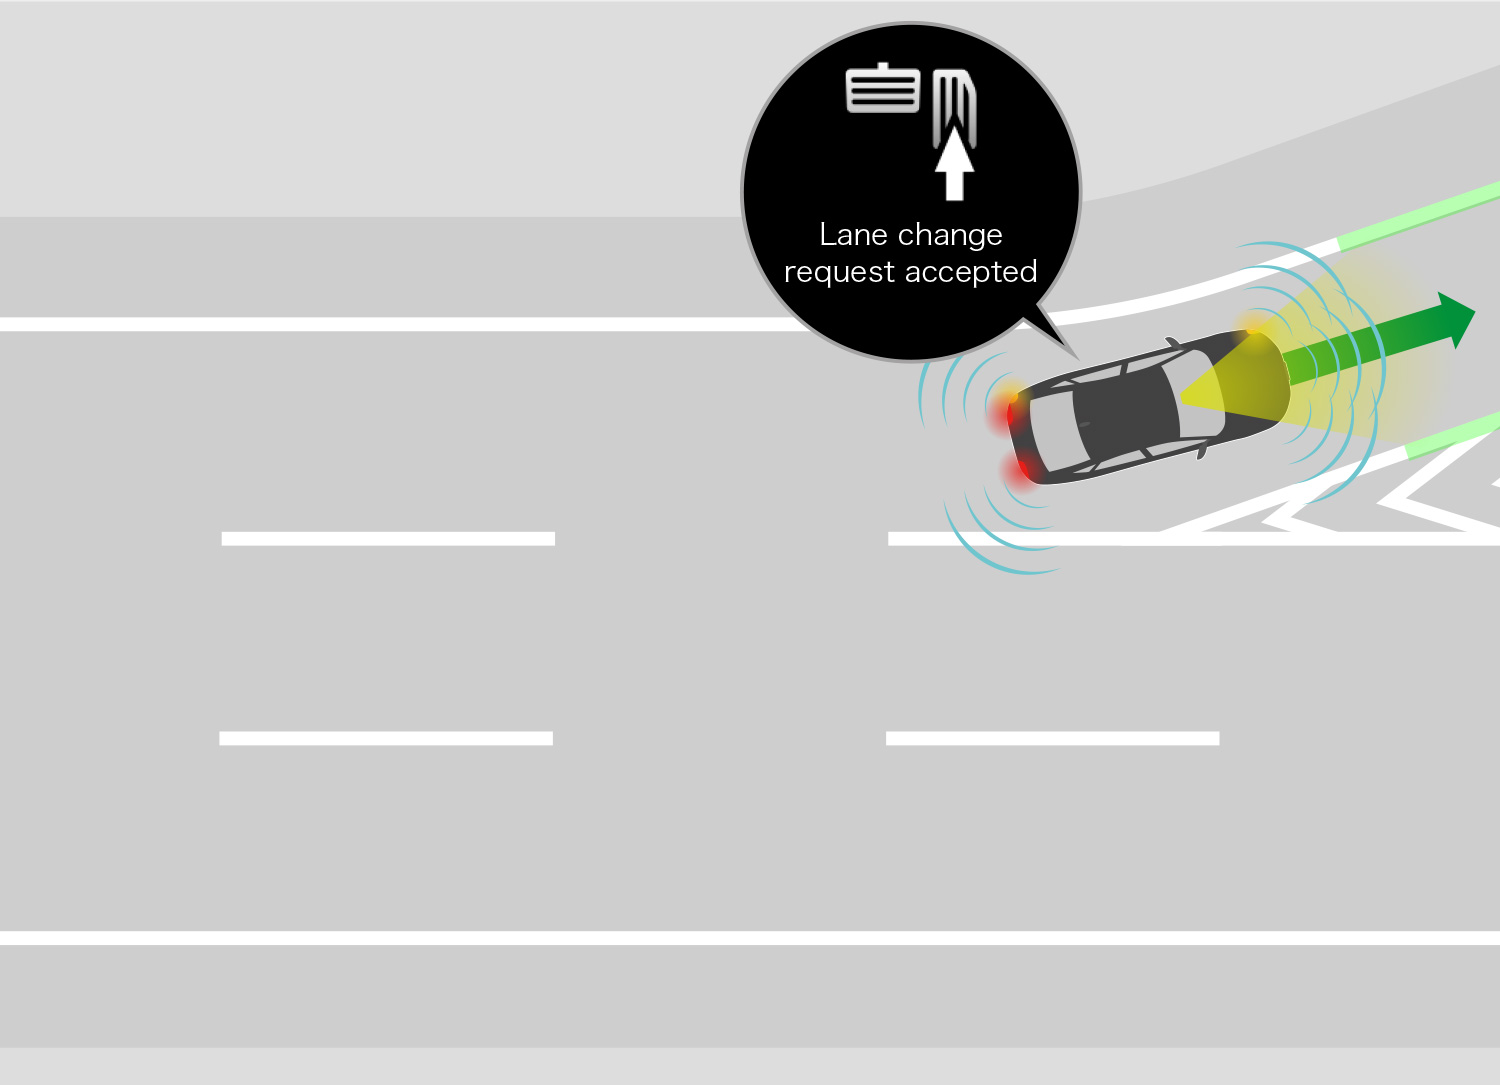 The system controls the acceleration up to the pre-set speed and assists the driver with entering the proper lane at a junction and/or exiting the expressway.